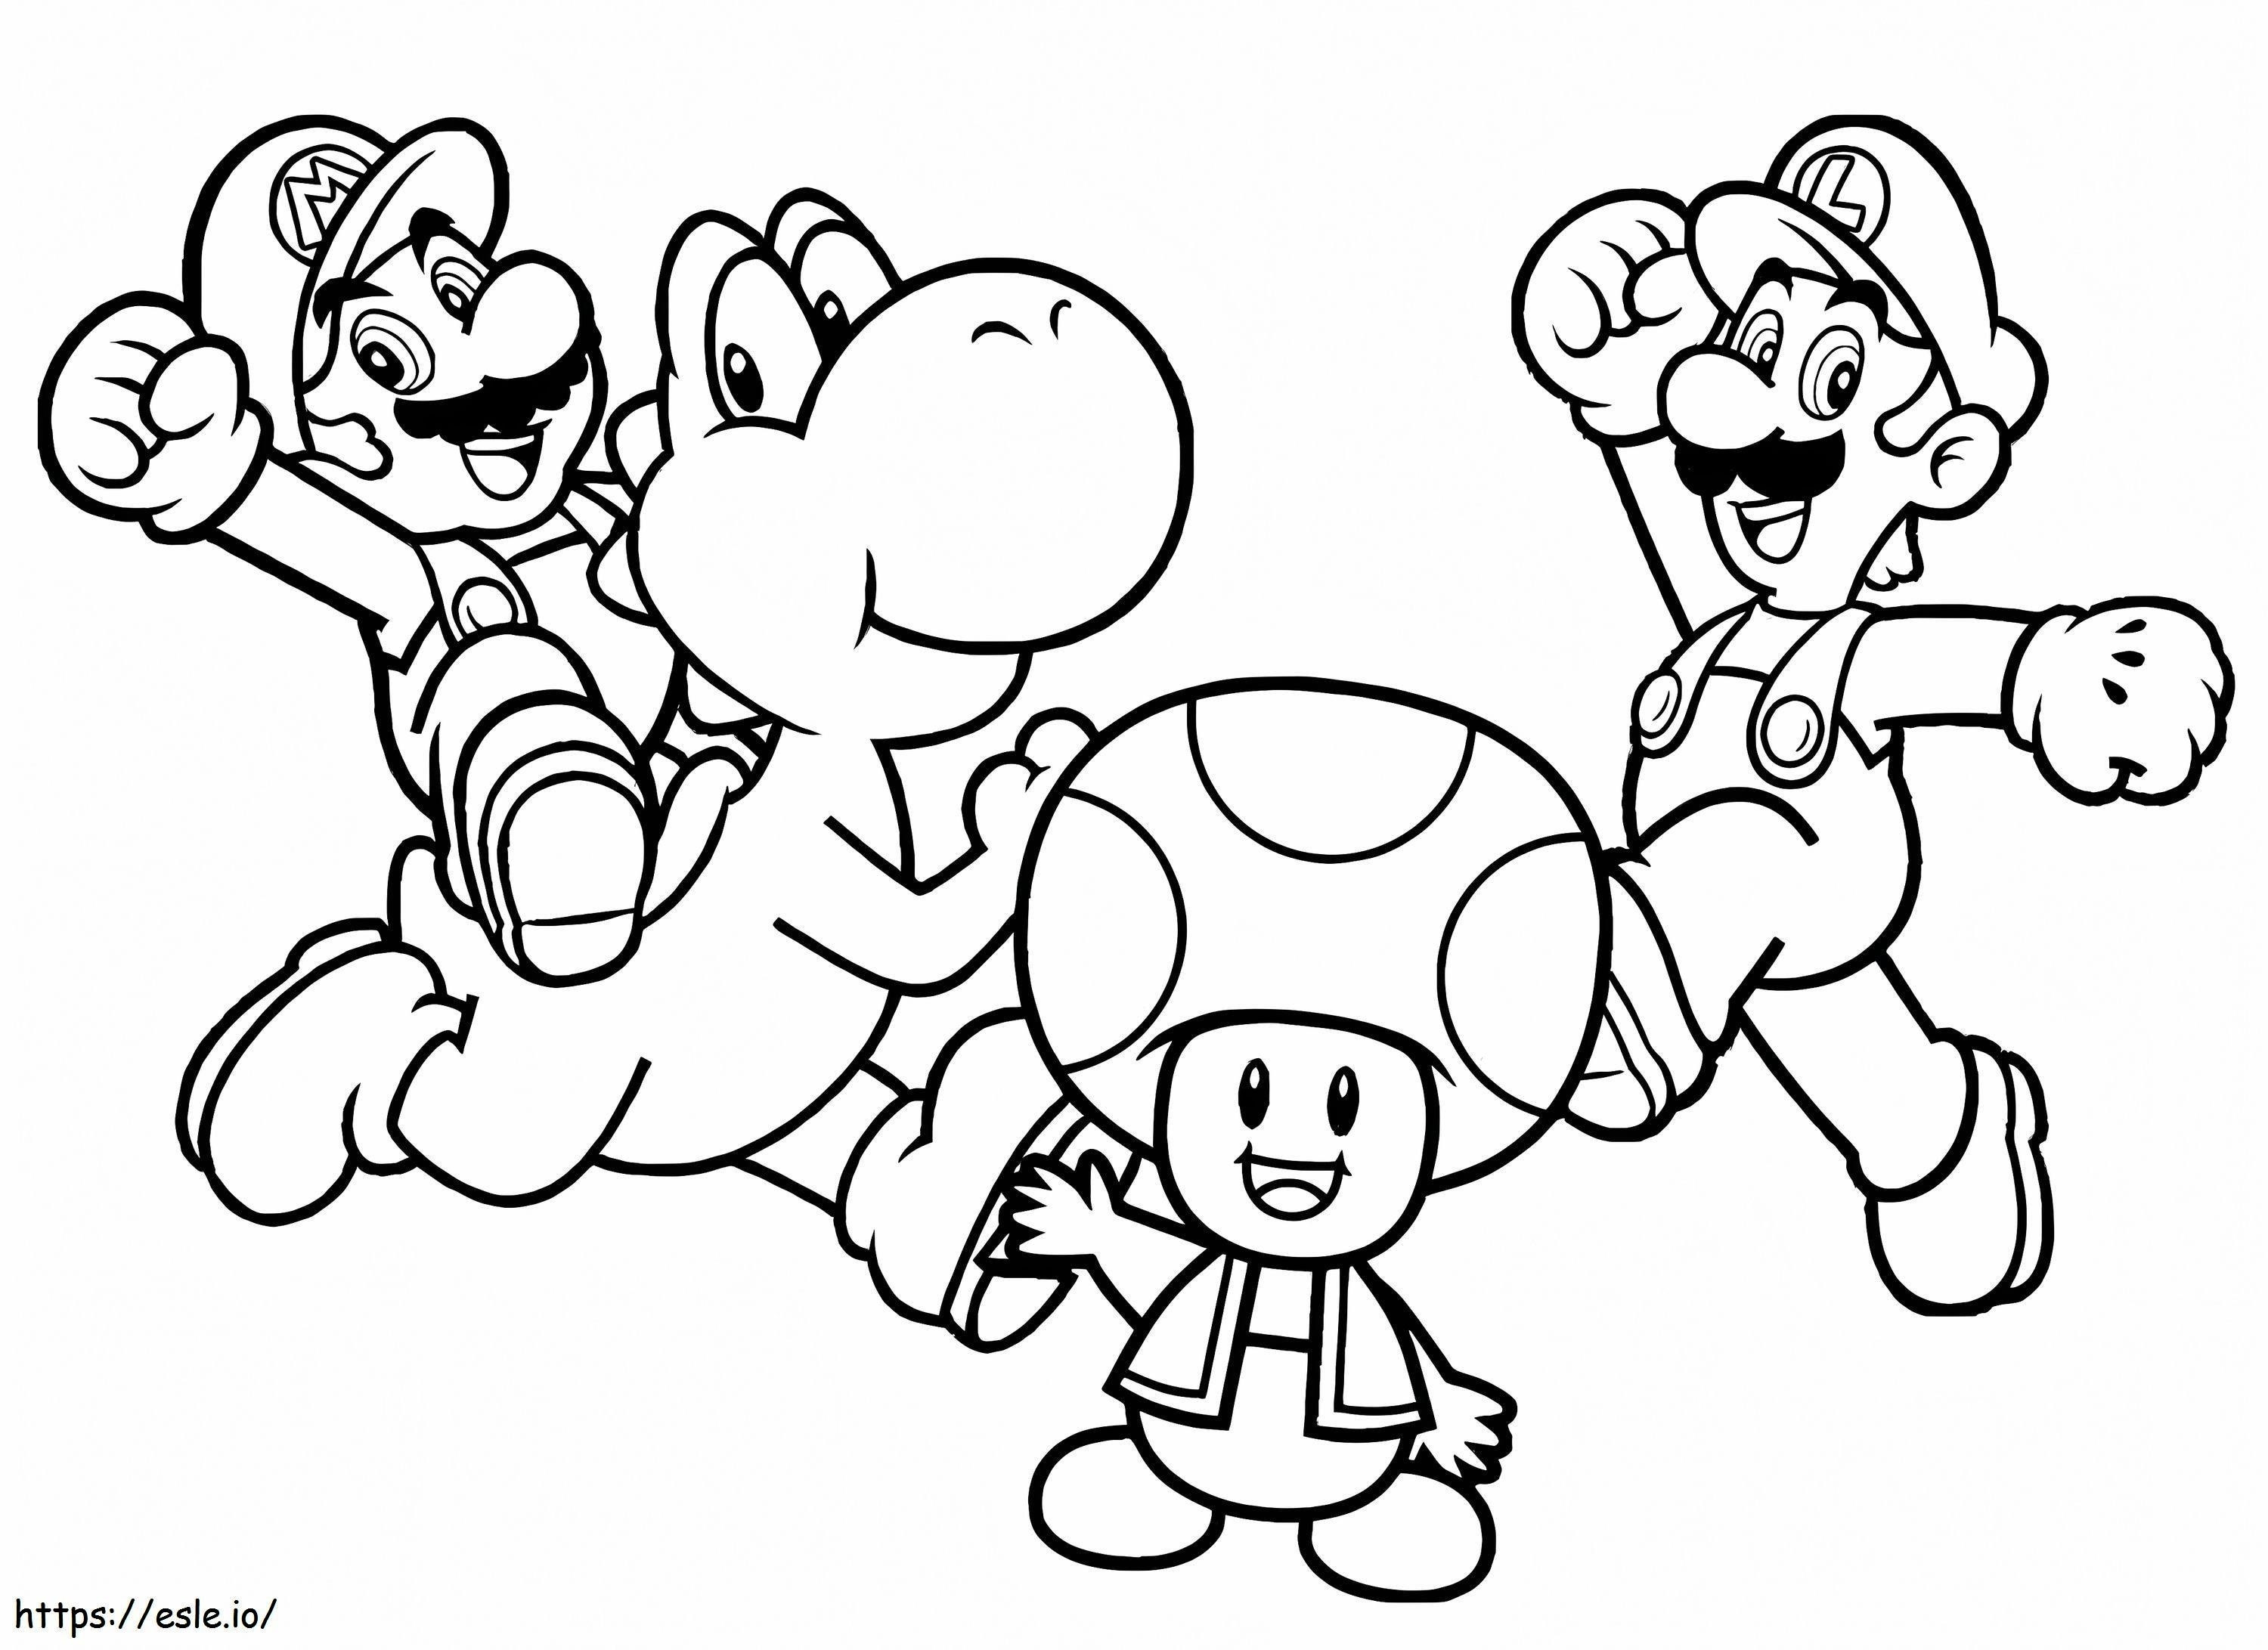 Mario Characters coloring page